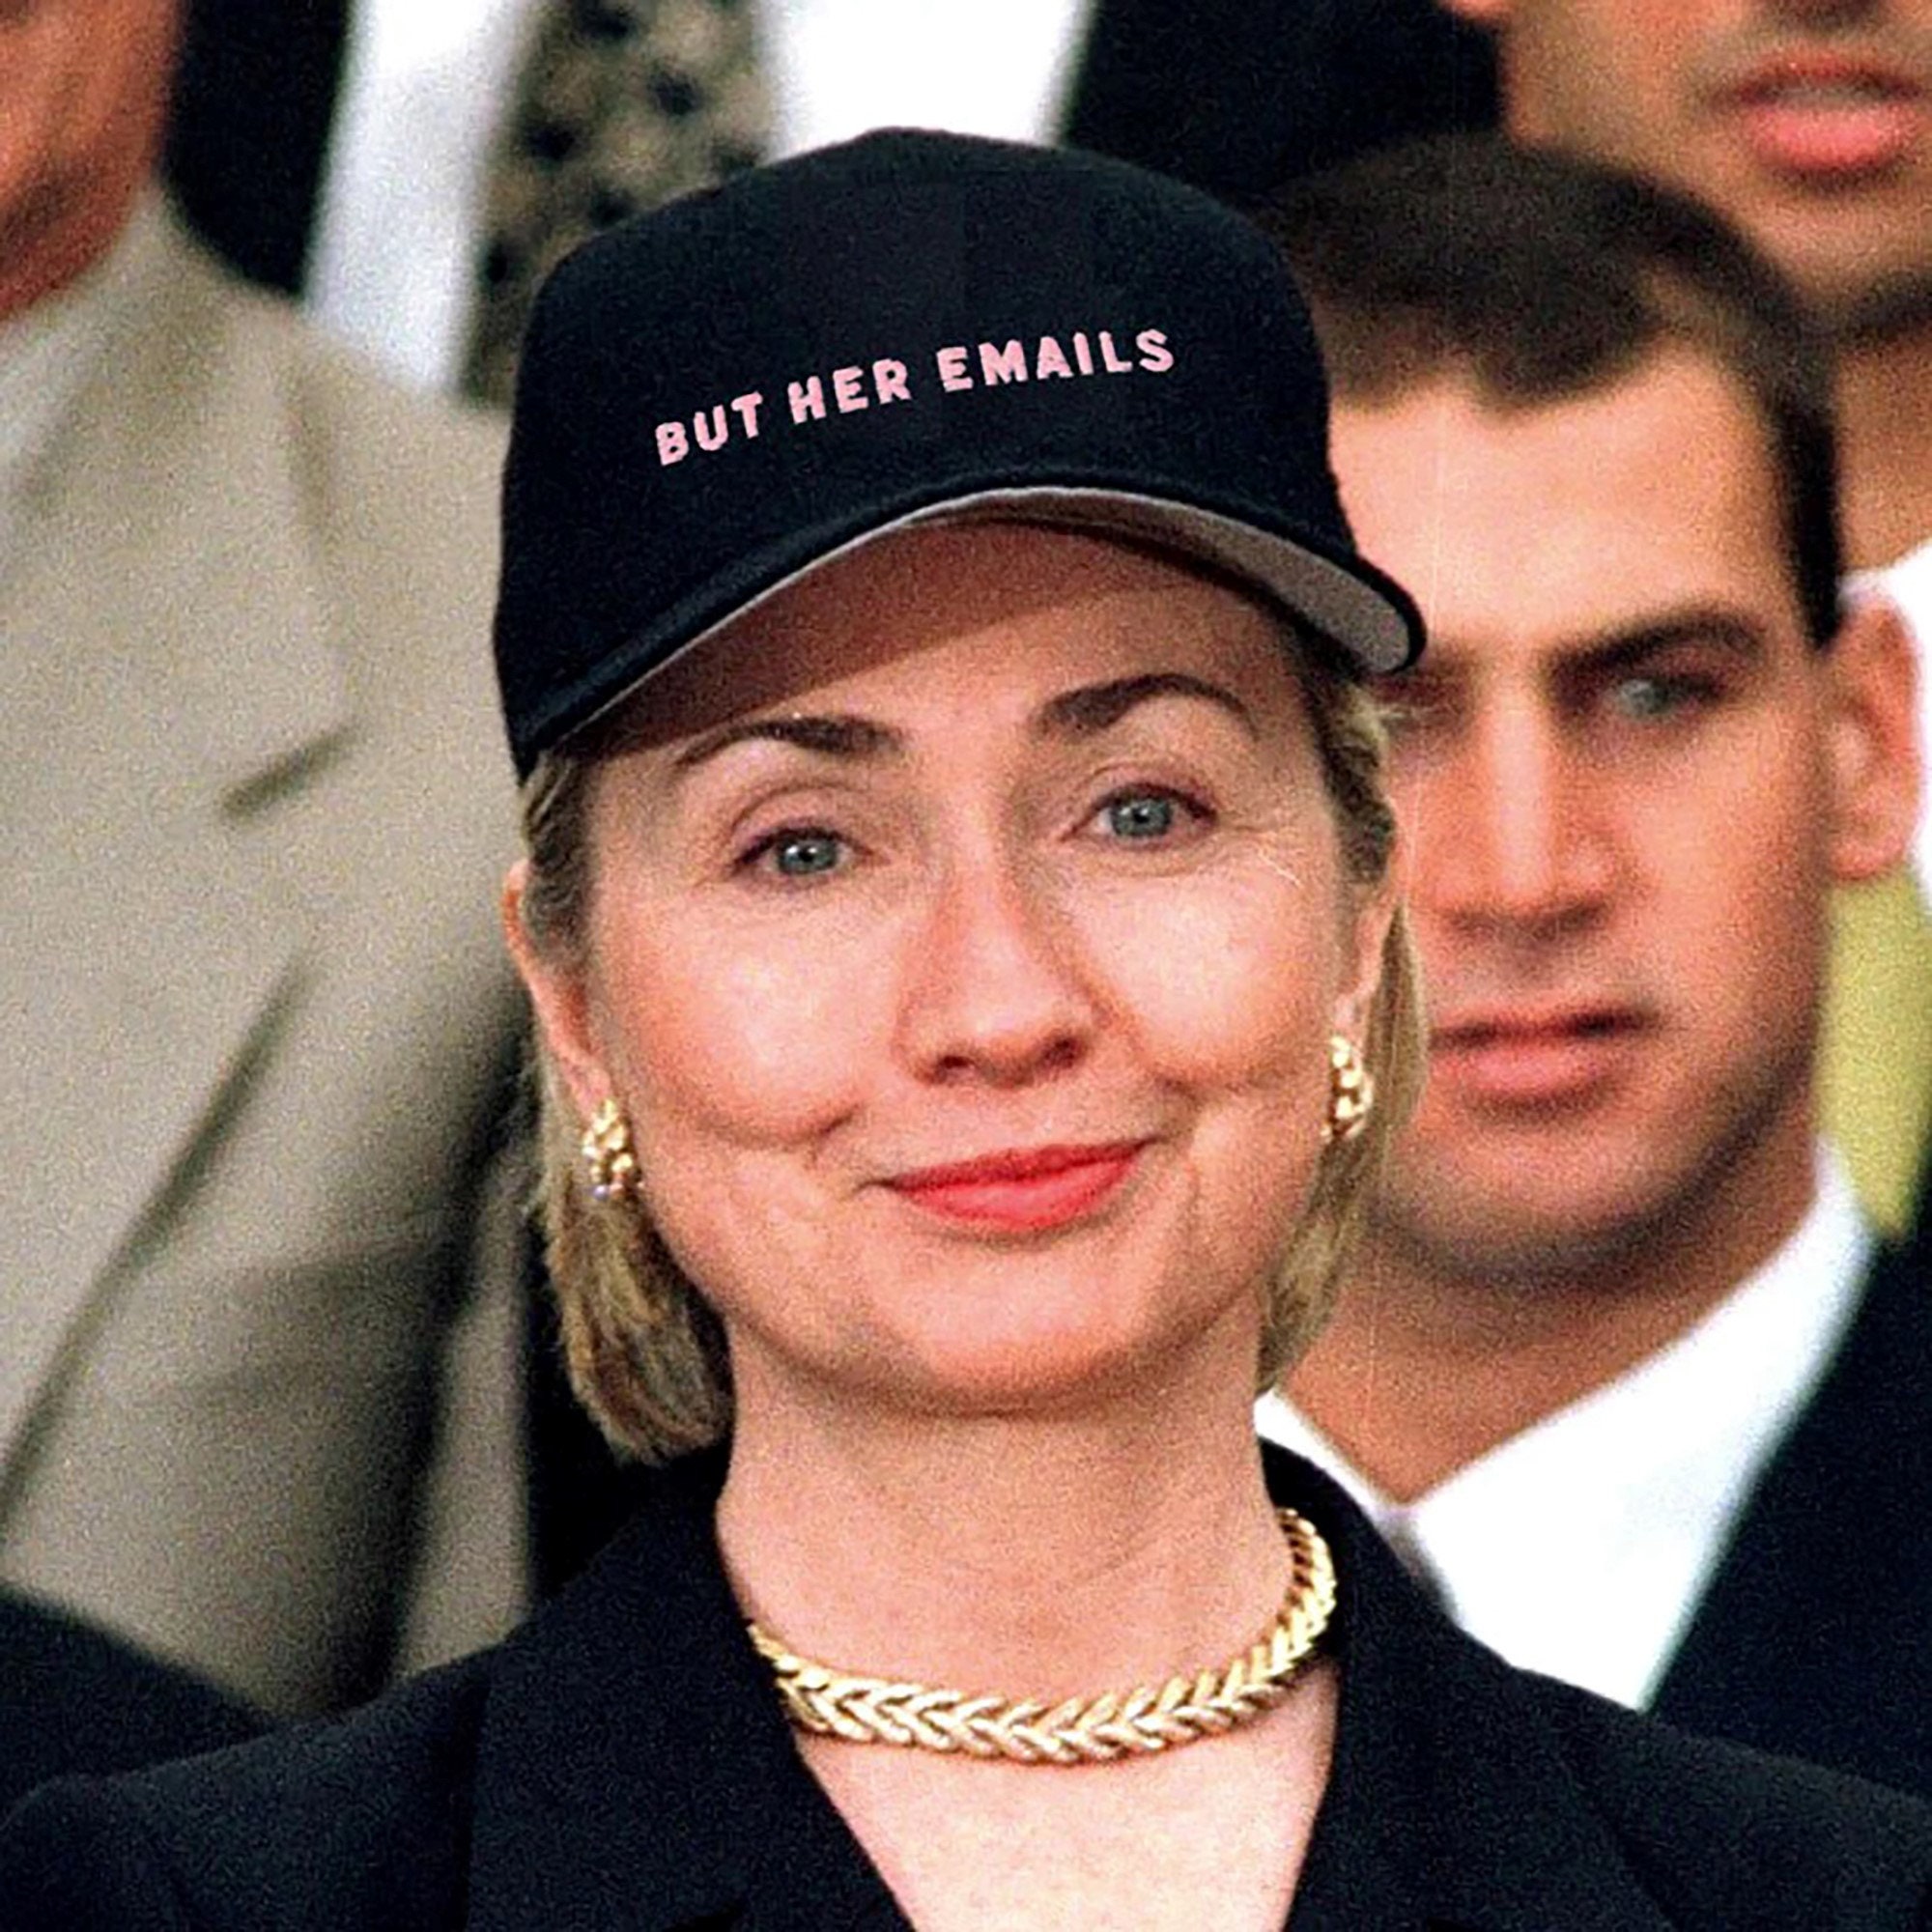 But Her Emails Hat, Her Emails Clinton Baseball Cap